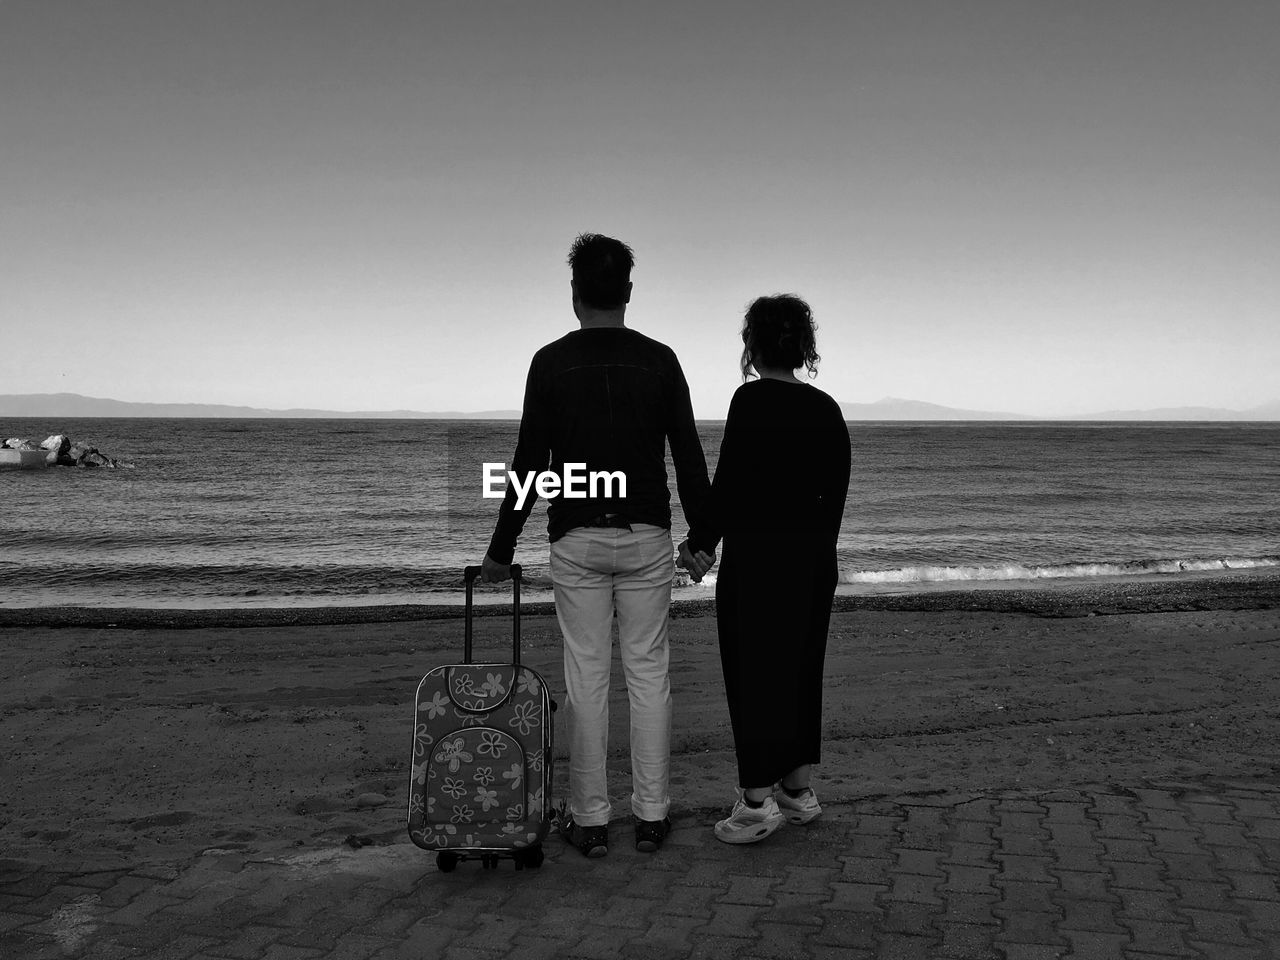 Couple with luggage standing at beach against 